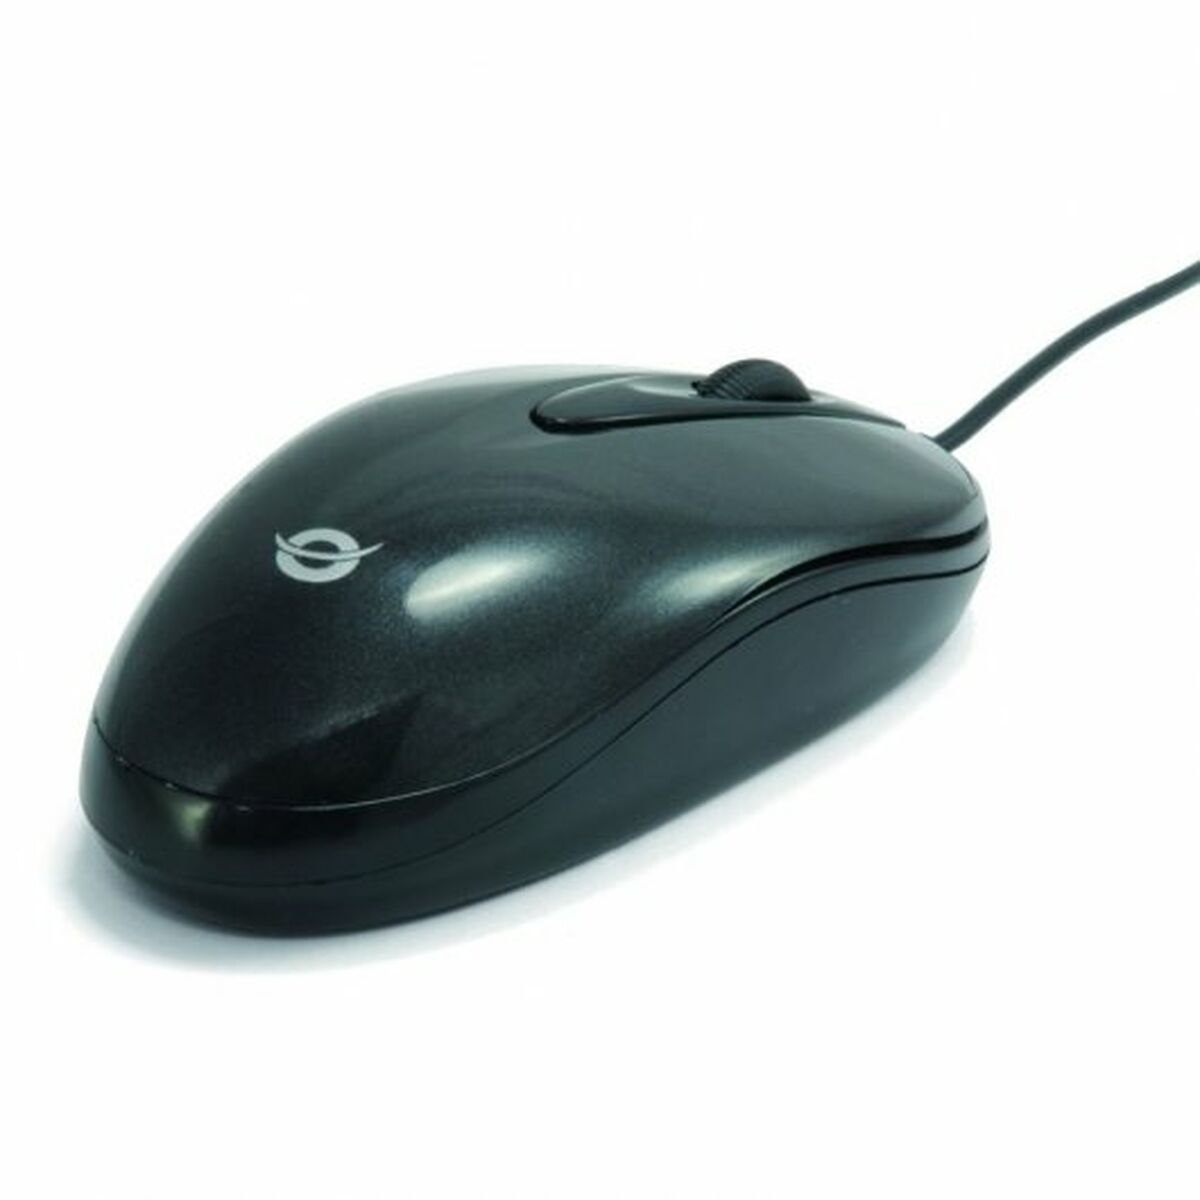 Mouse Conceptronic CLLMEASY Grey Black/Grey, Conceptronic, Computing, Accessories, mouse-conceptronic-cllmeasy-grey-black-grey, Brand_Conceptronic, category-reference-2609, category-reference-2642, category-reference-2656, category-reference-t-19685, category-reference-t-19908, category-reference-t-21353, computers / peripherals, Condition_NEW, office, Price_20 - 50, Teleworking, RiotNook